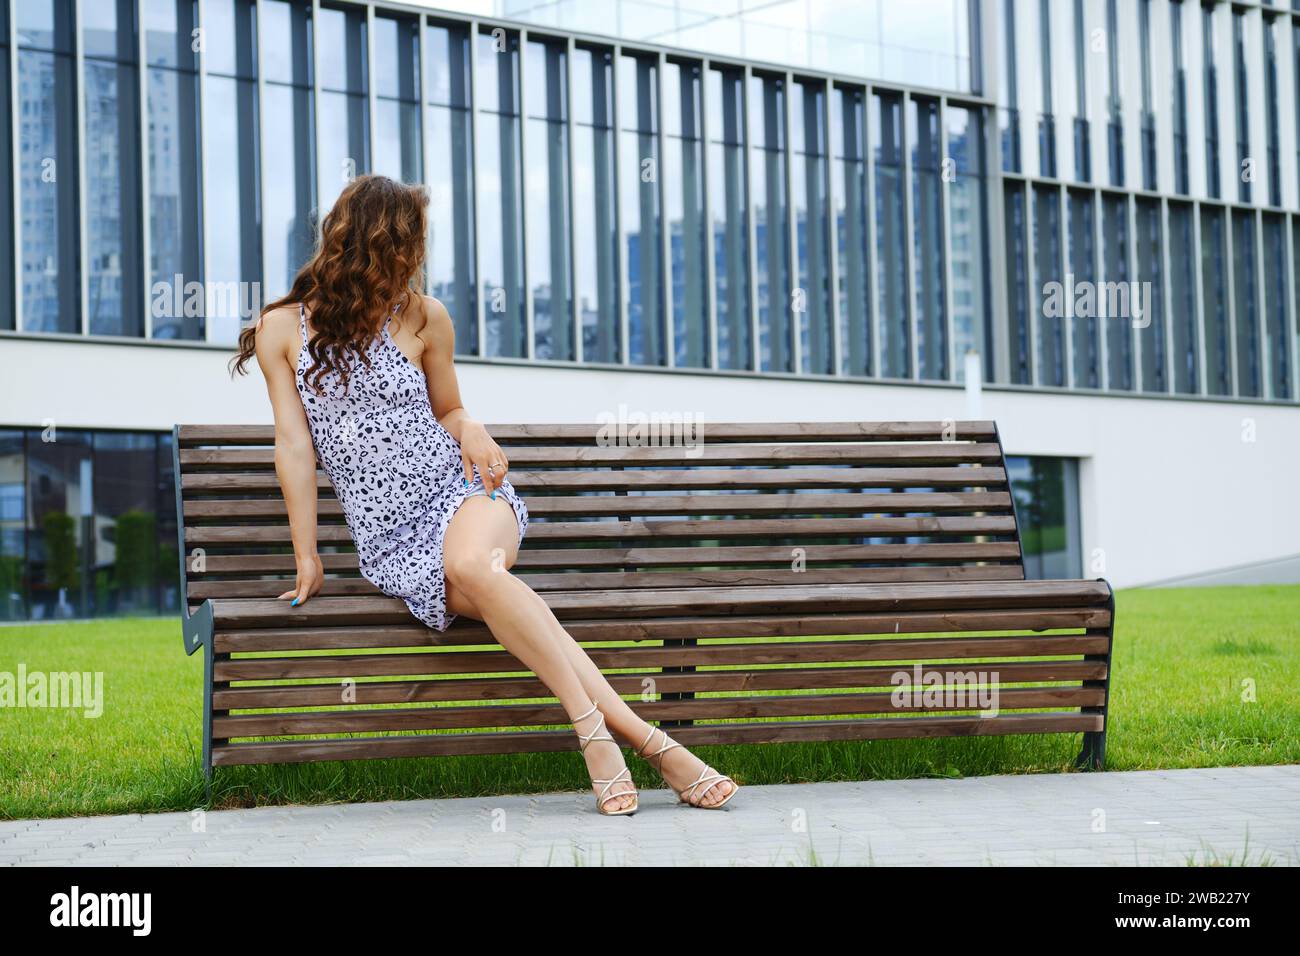 Unrecognizable woman with long slim legs in sandals on bench Stock Photo